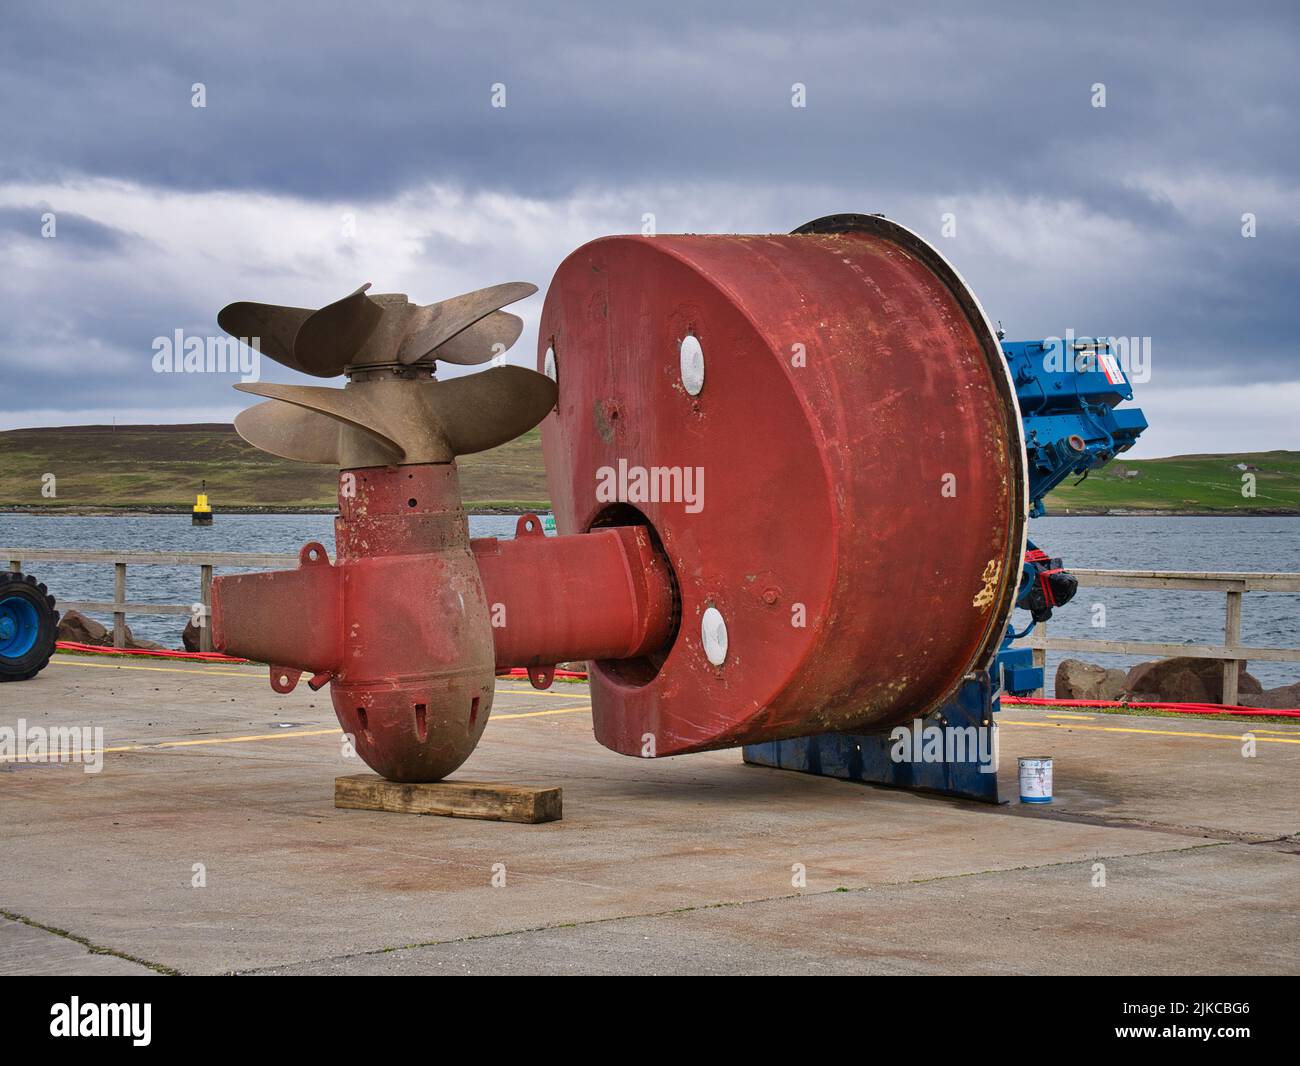 A large, red, twin propellor - twin screw screw azimuth thruster unit on the quay at Lerwick harbour in Shetland, UK. Taken on a cloudy, overcast day. Stock Photo